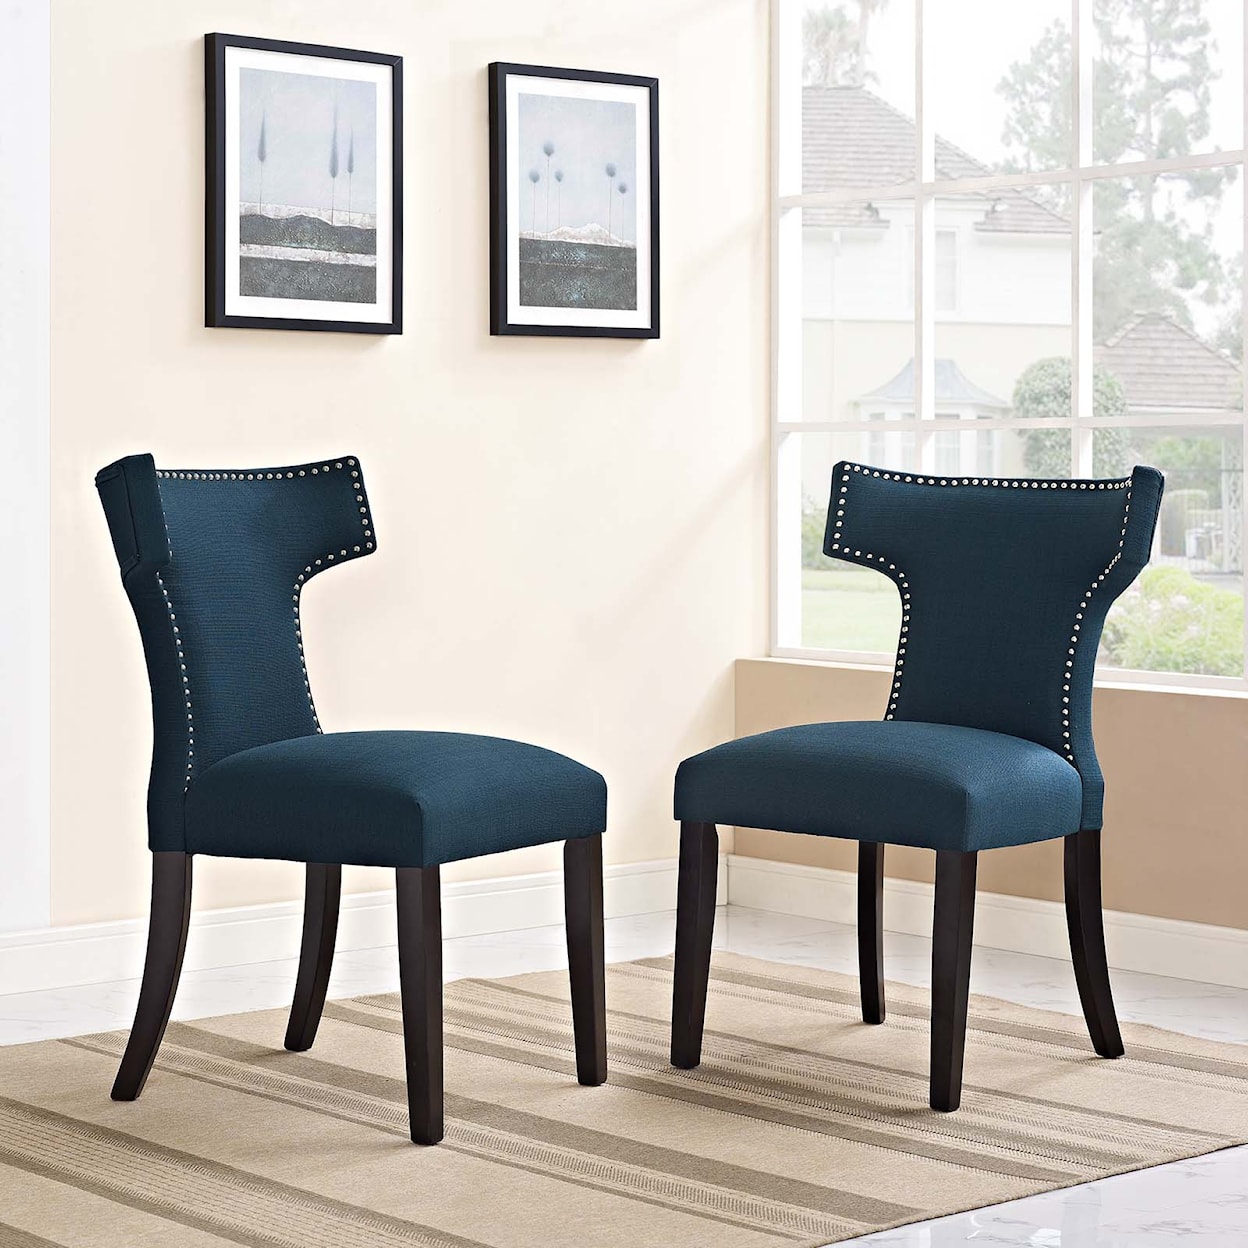 Modway Curve Dining Side Chair